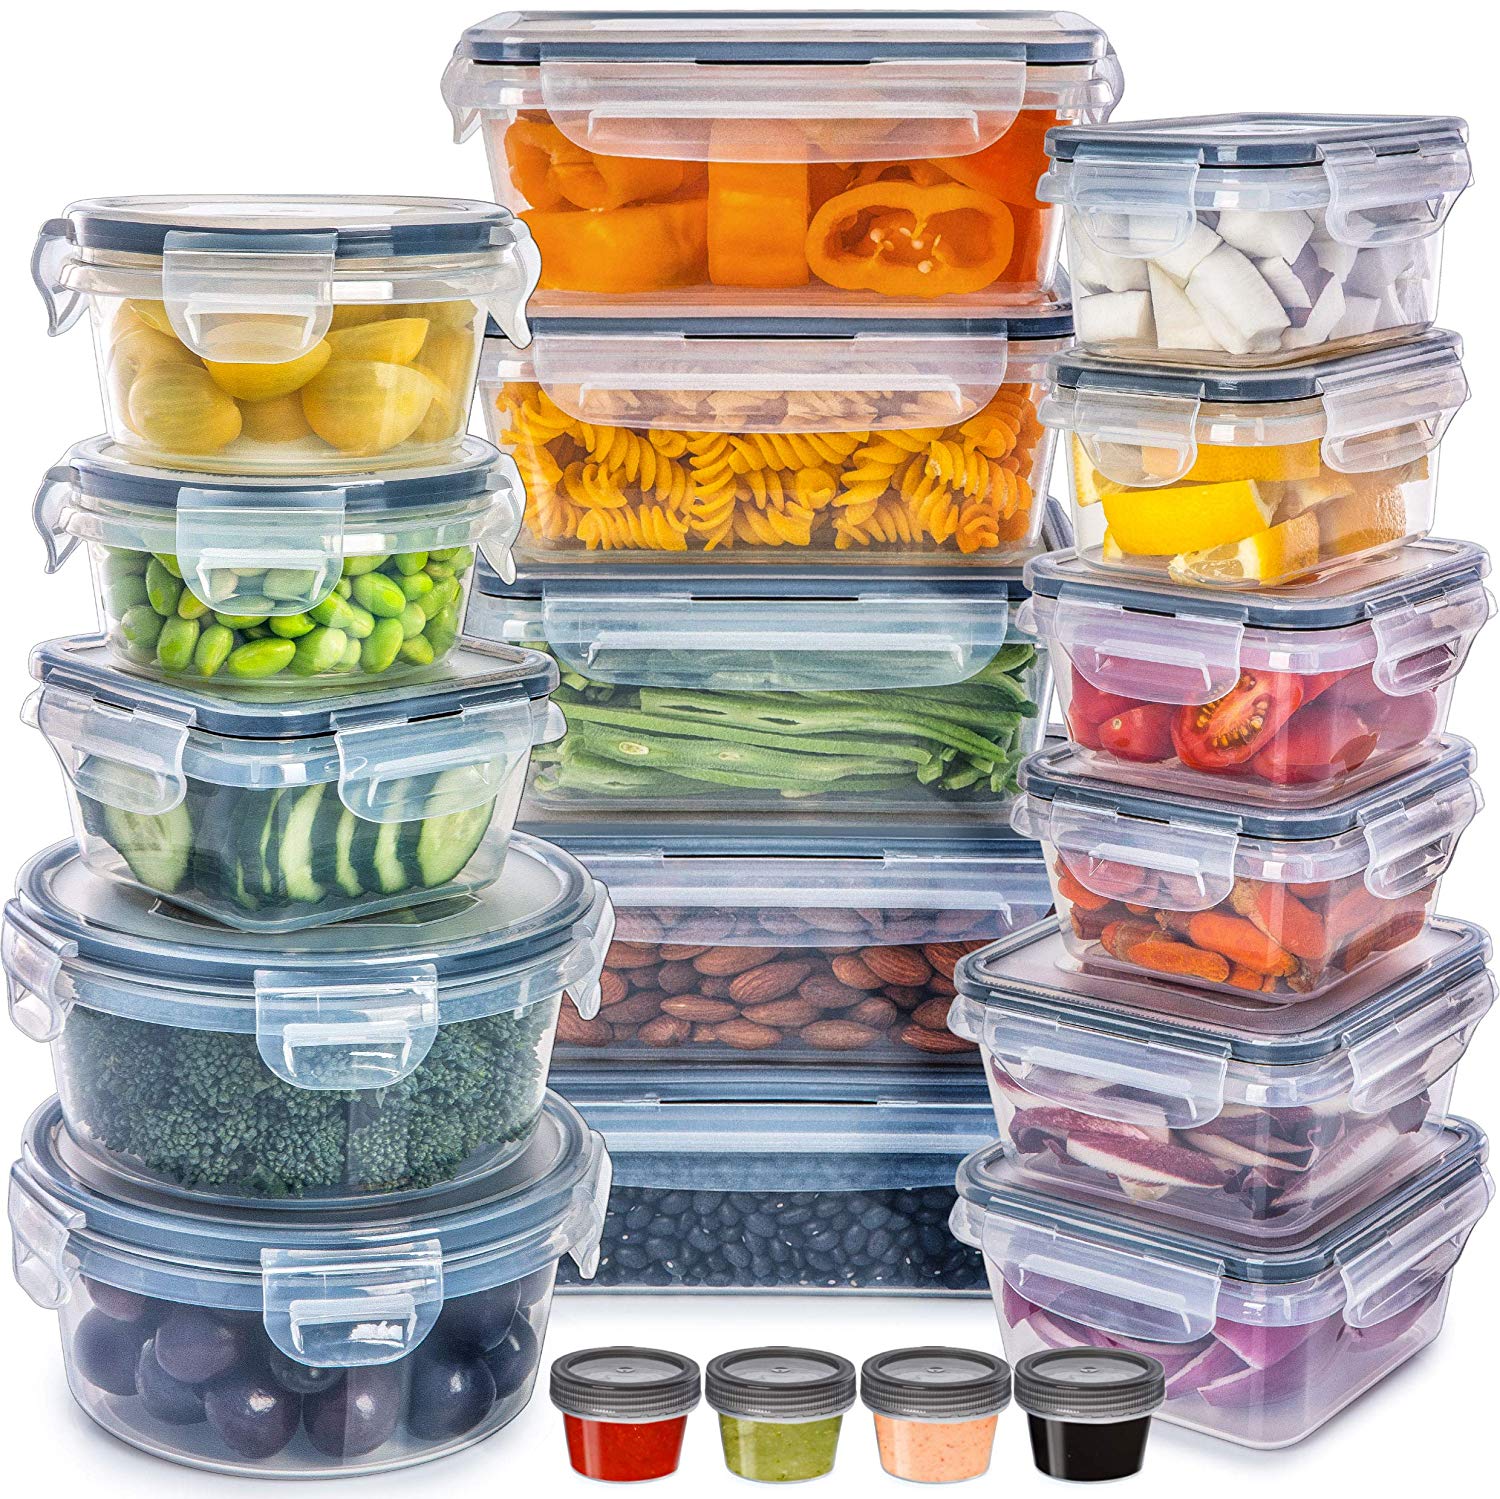 Fullstar Food Storage Containers With Lids Set Of 20 Food Storage For Lunch 